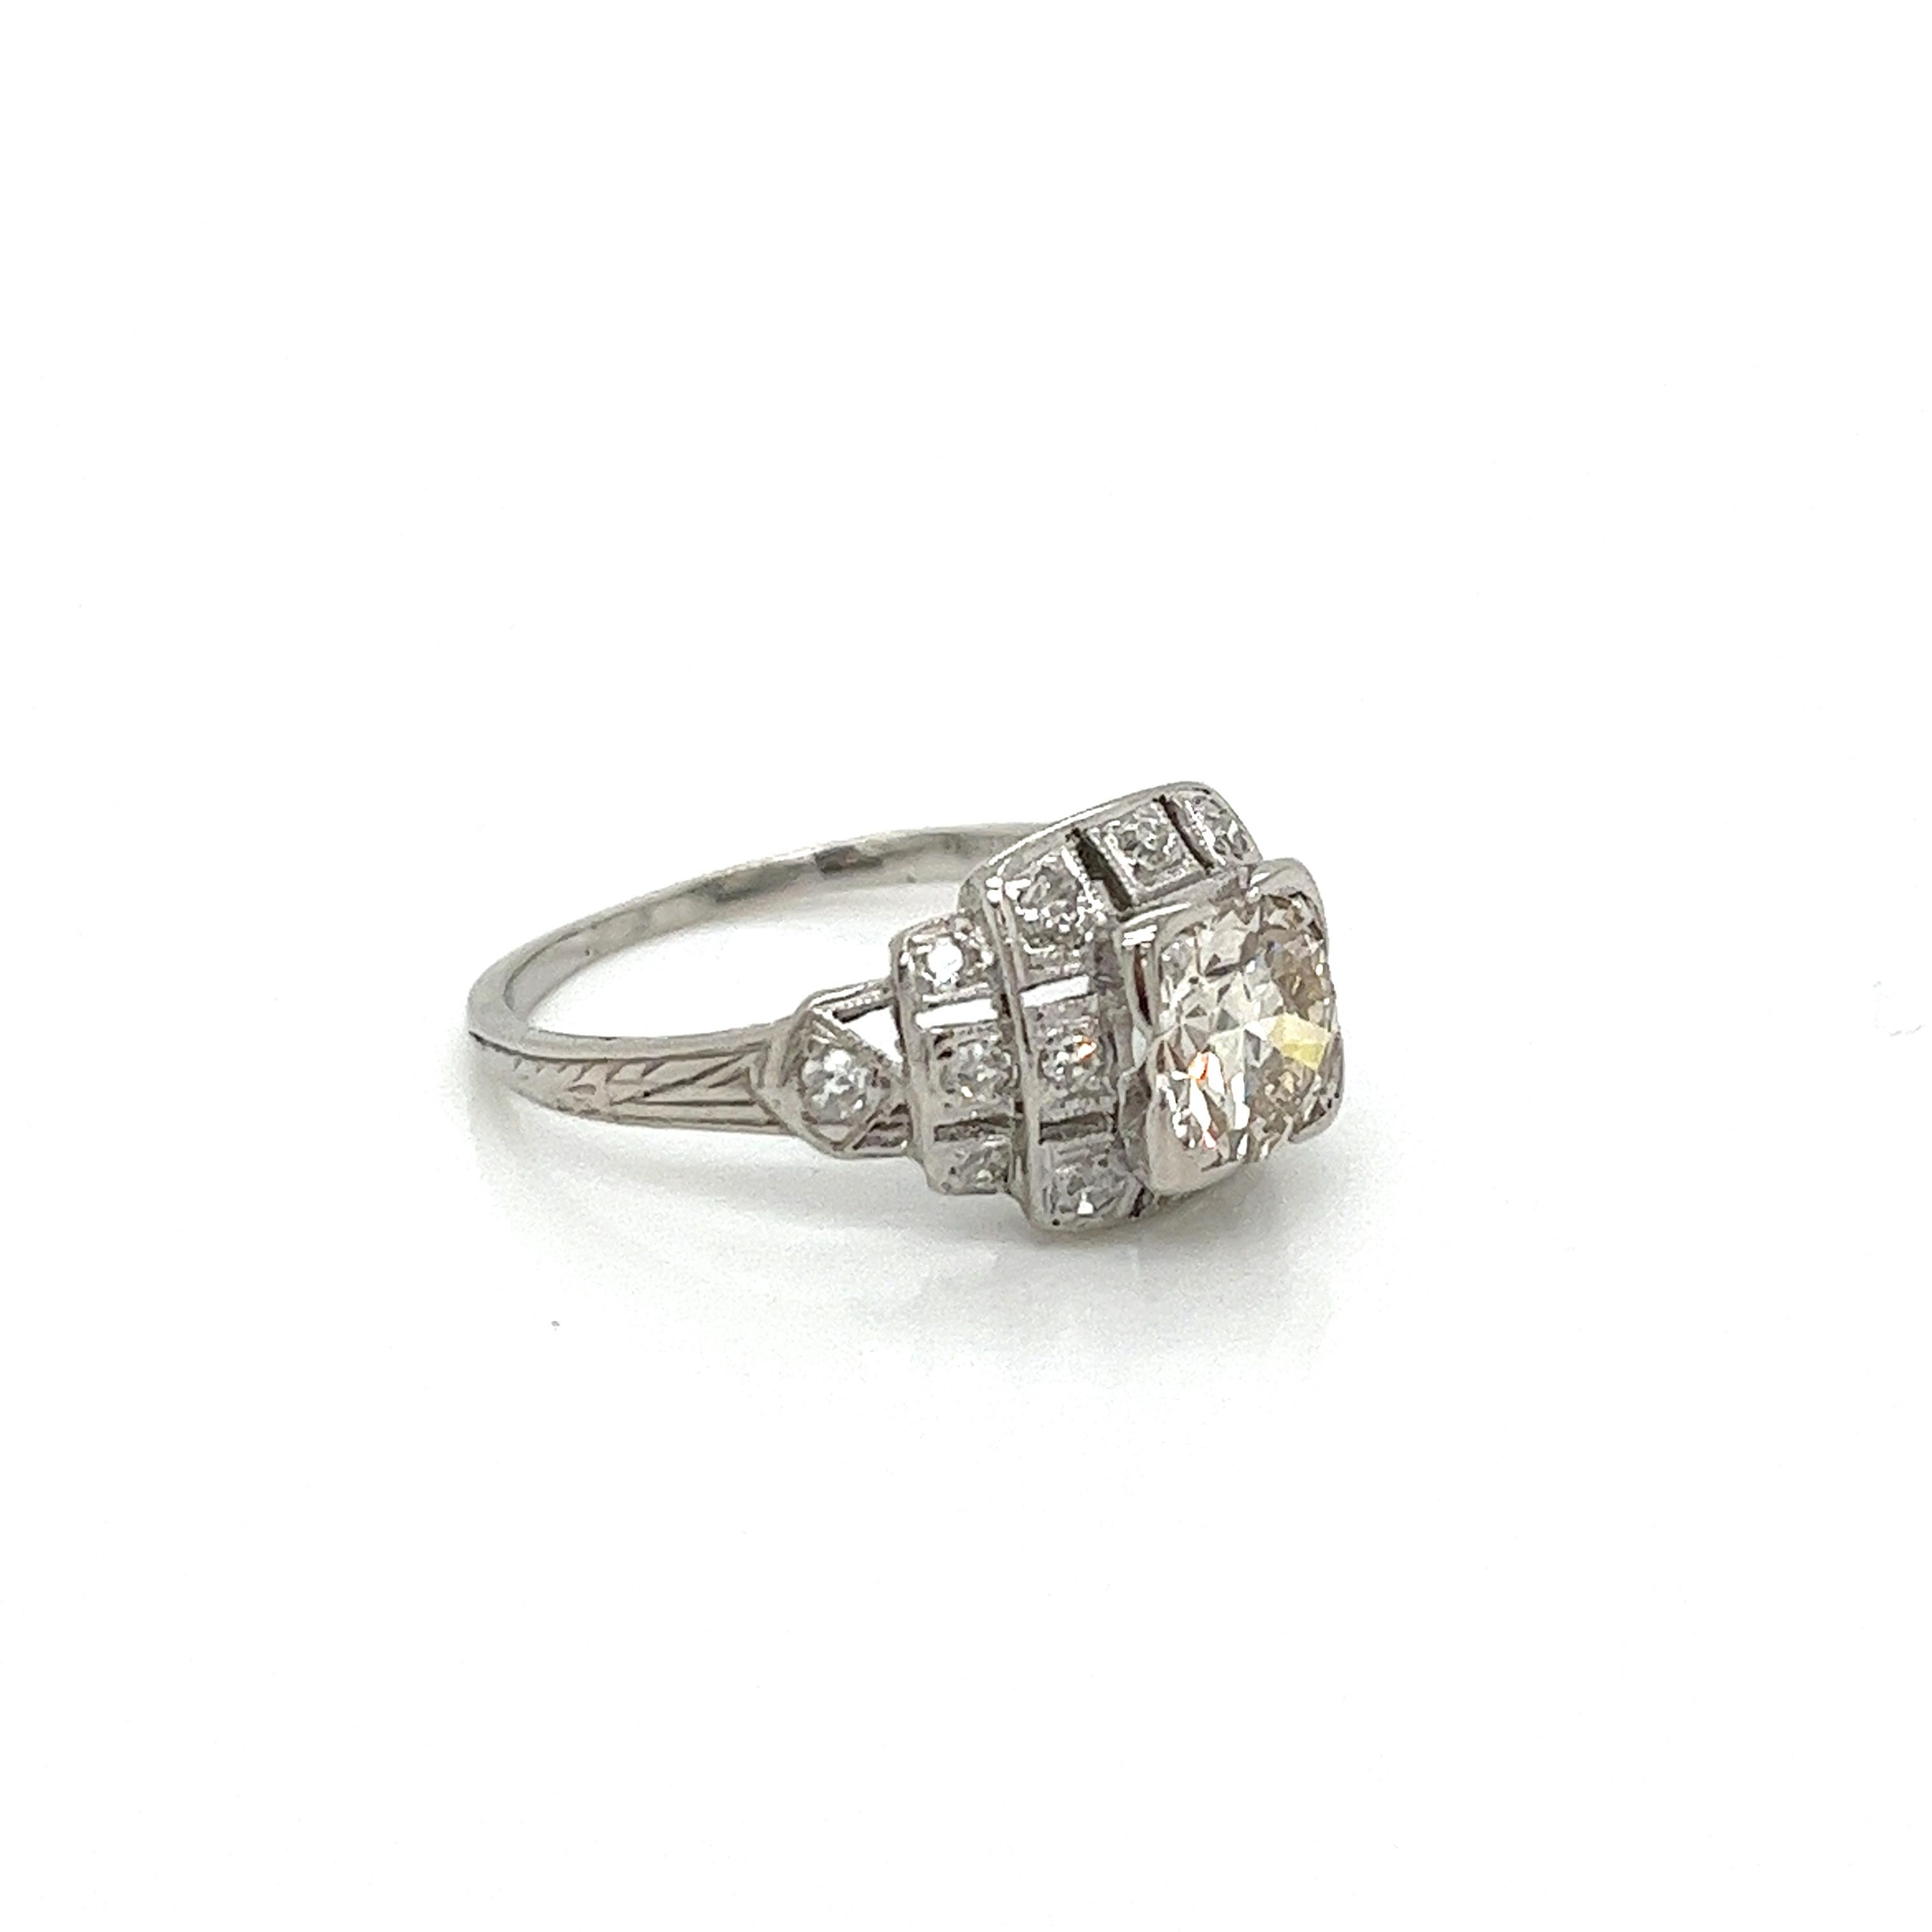 This exquisite platinum ring is a stunning example of Art Deco elegance. The centerpiece is a sparkling old European cut diamond weighing approximately 0.82 carats. Its warm K color is complemented by its SI1 clarity, allowing the diamond to truly